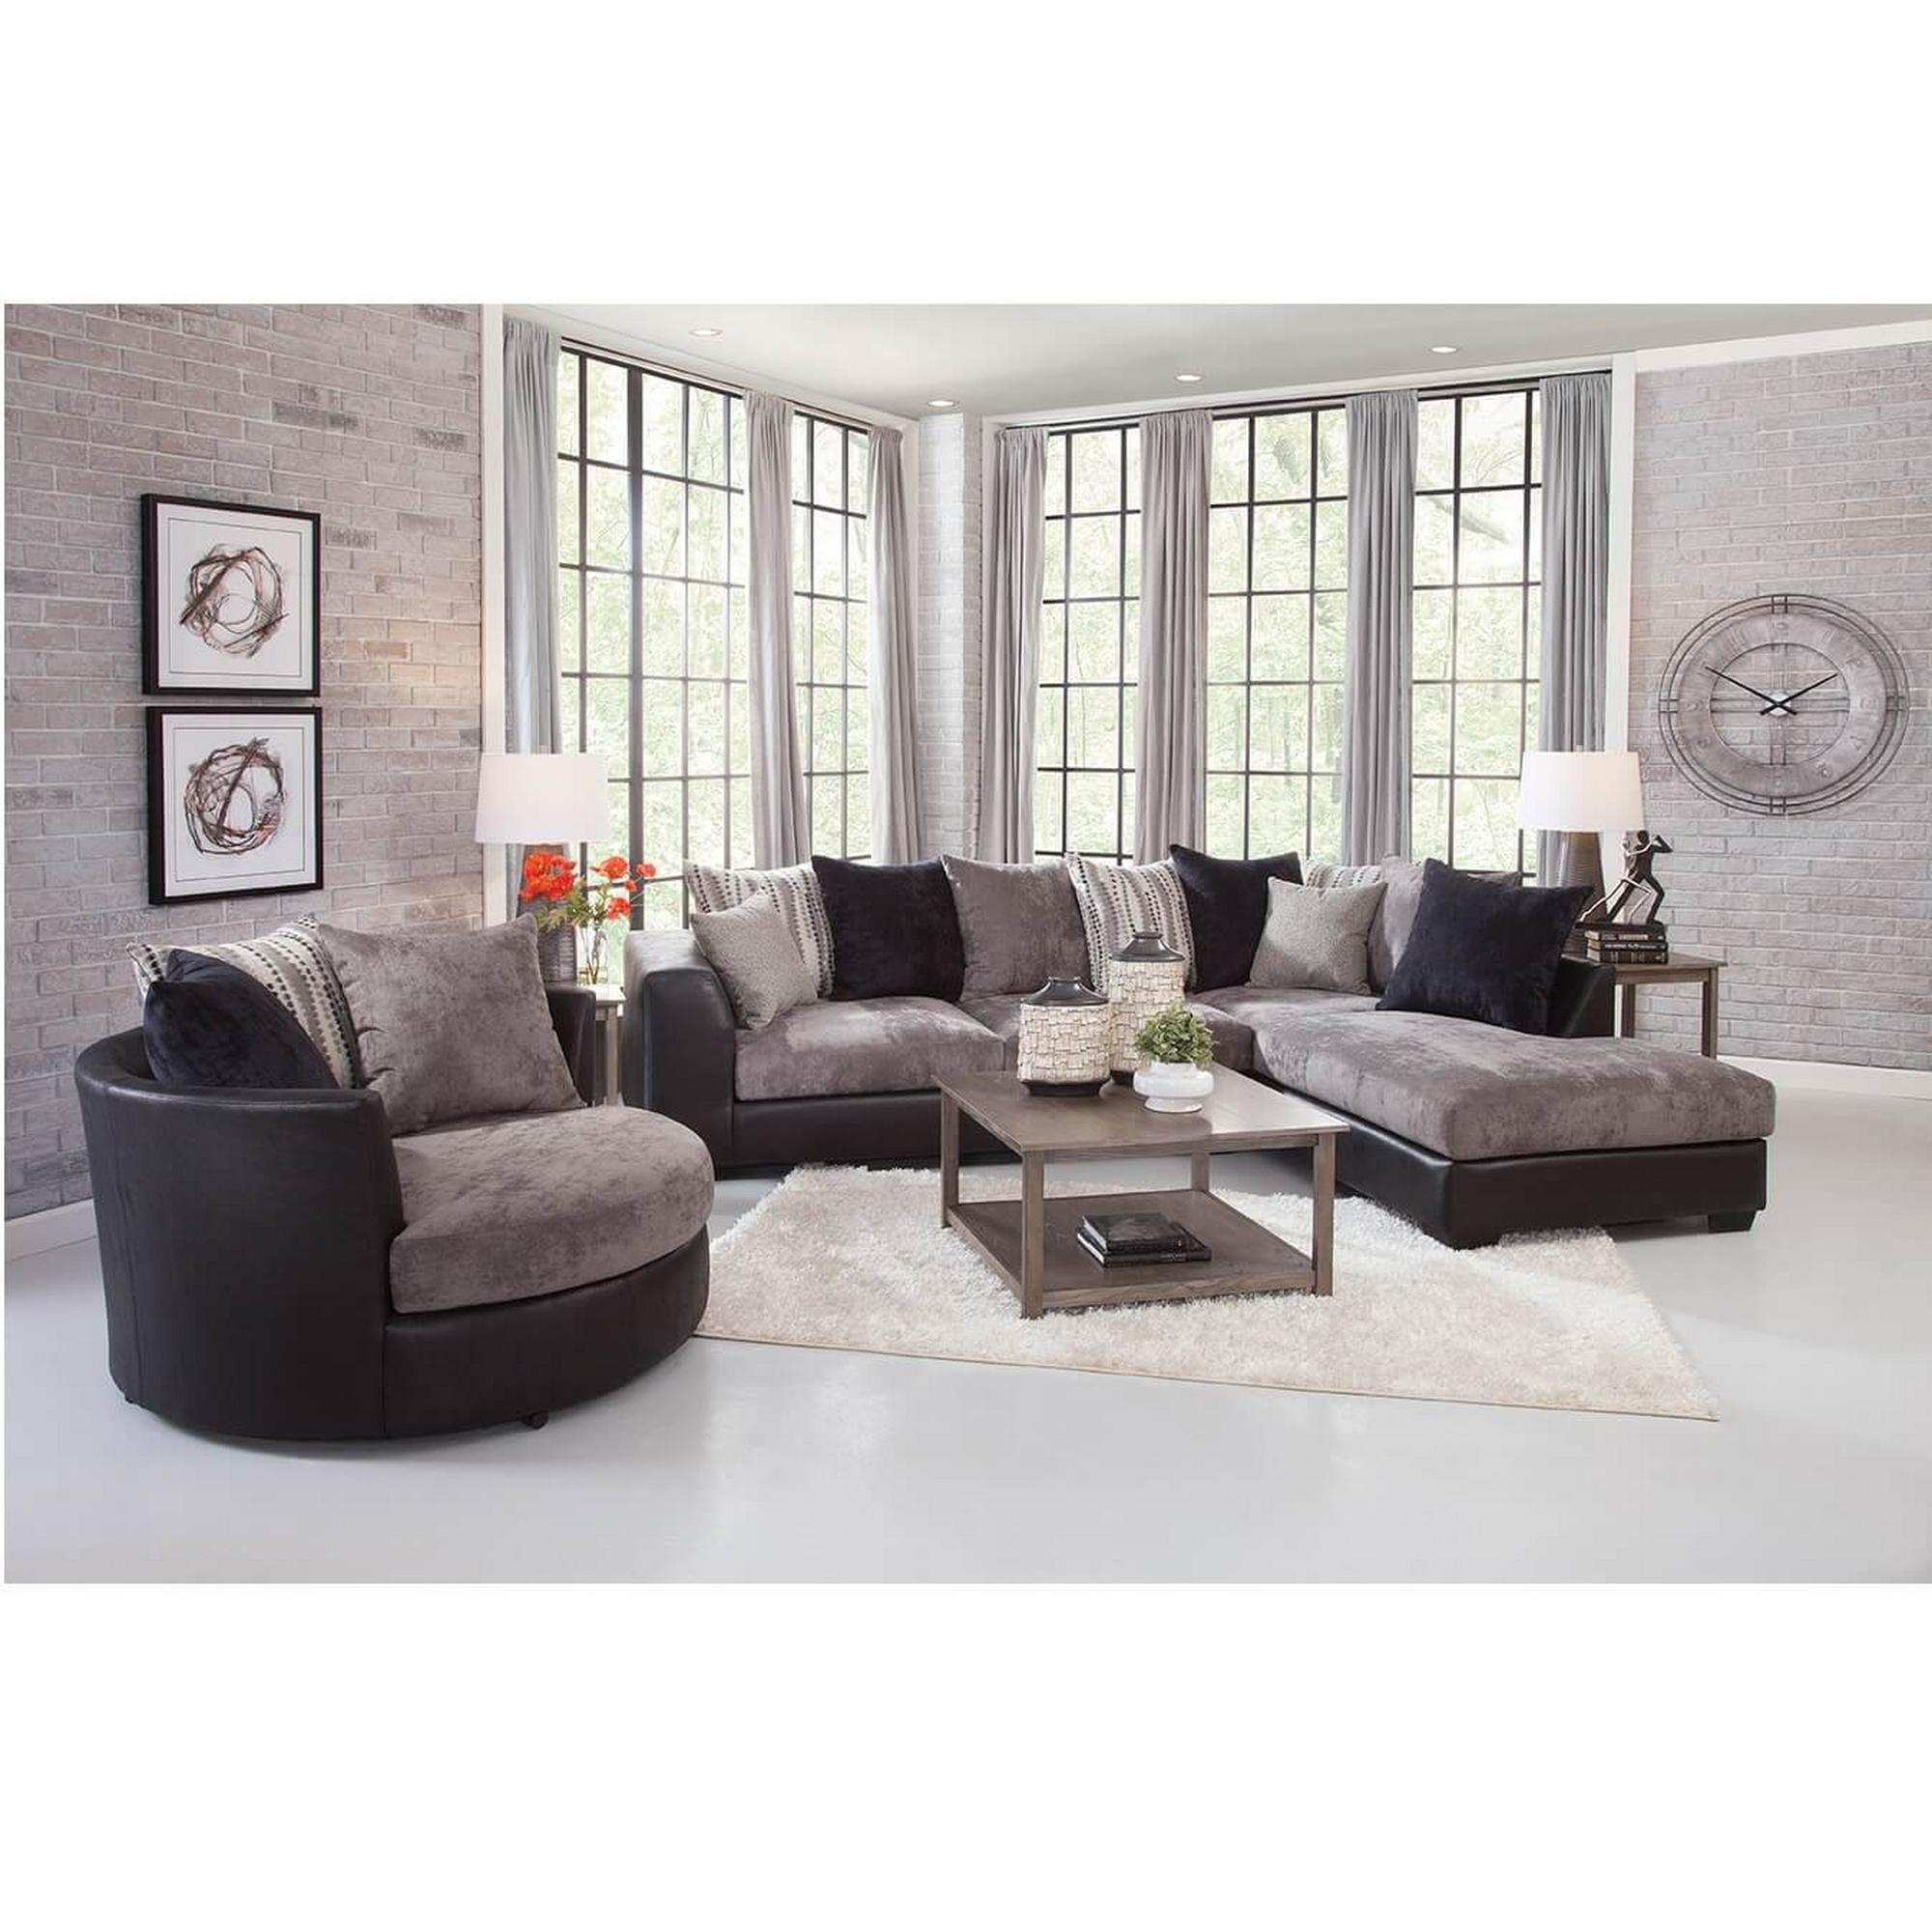 Rent To Own Woodhaven 8 Piece Jamal Chaise Sofa Sectional Living Room Collection With Barrel Chair At Aarons Today